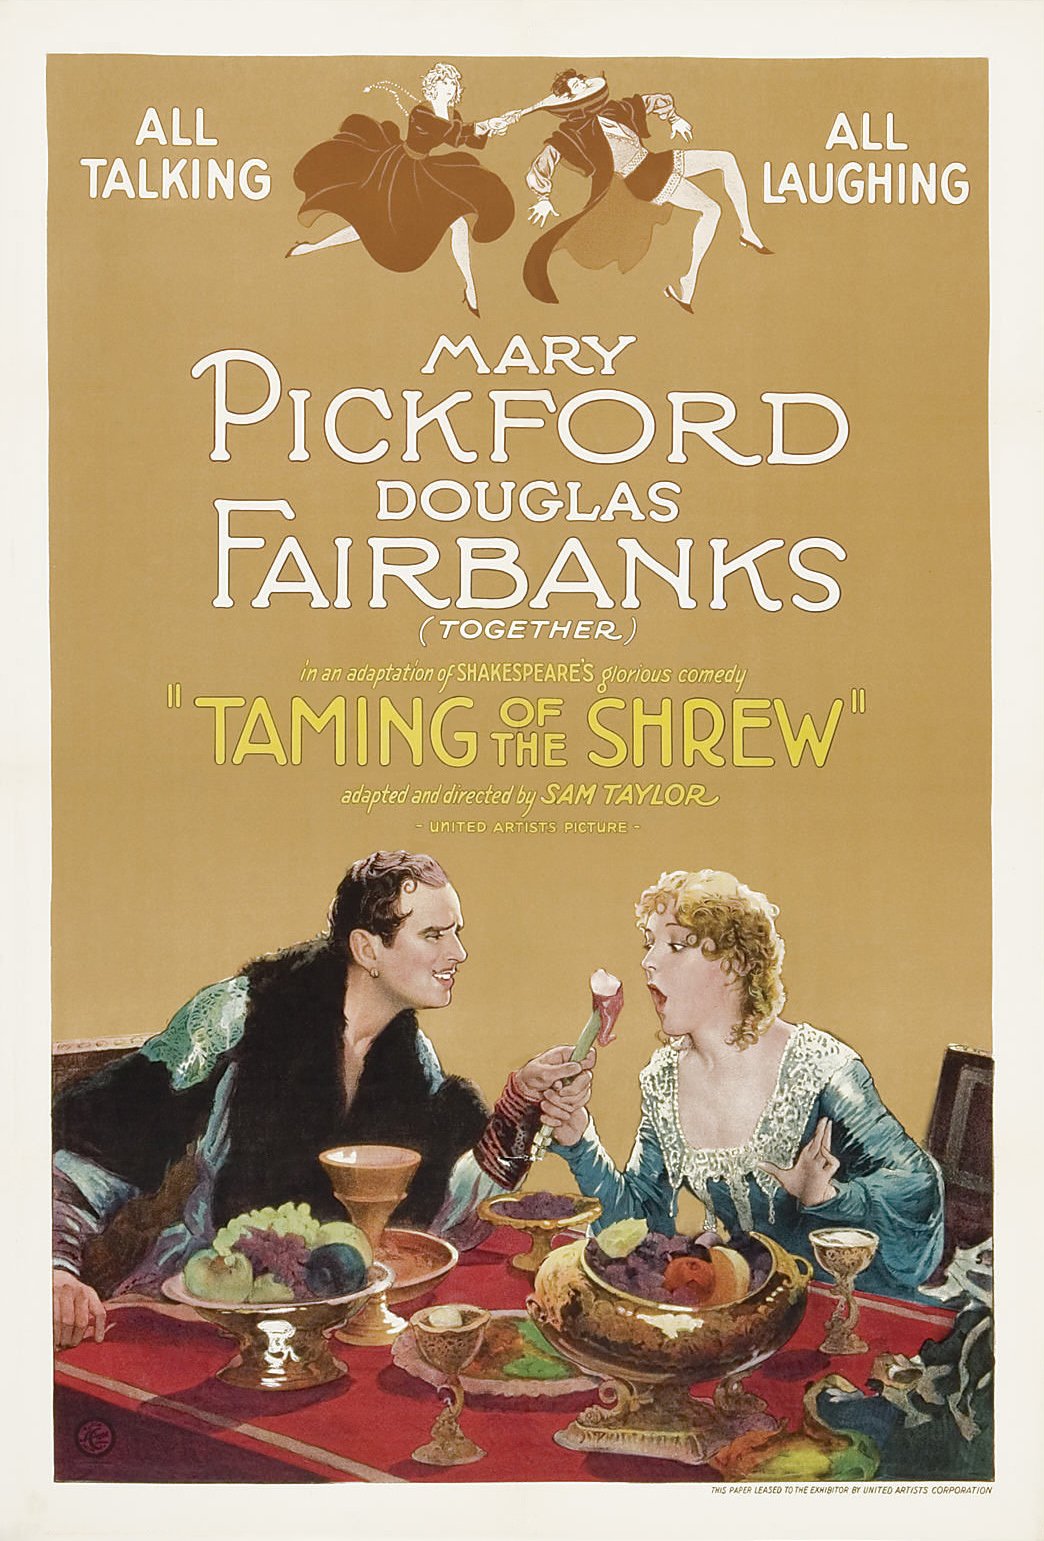 Poster of the movie The Taming of the Shrew